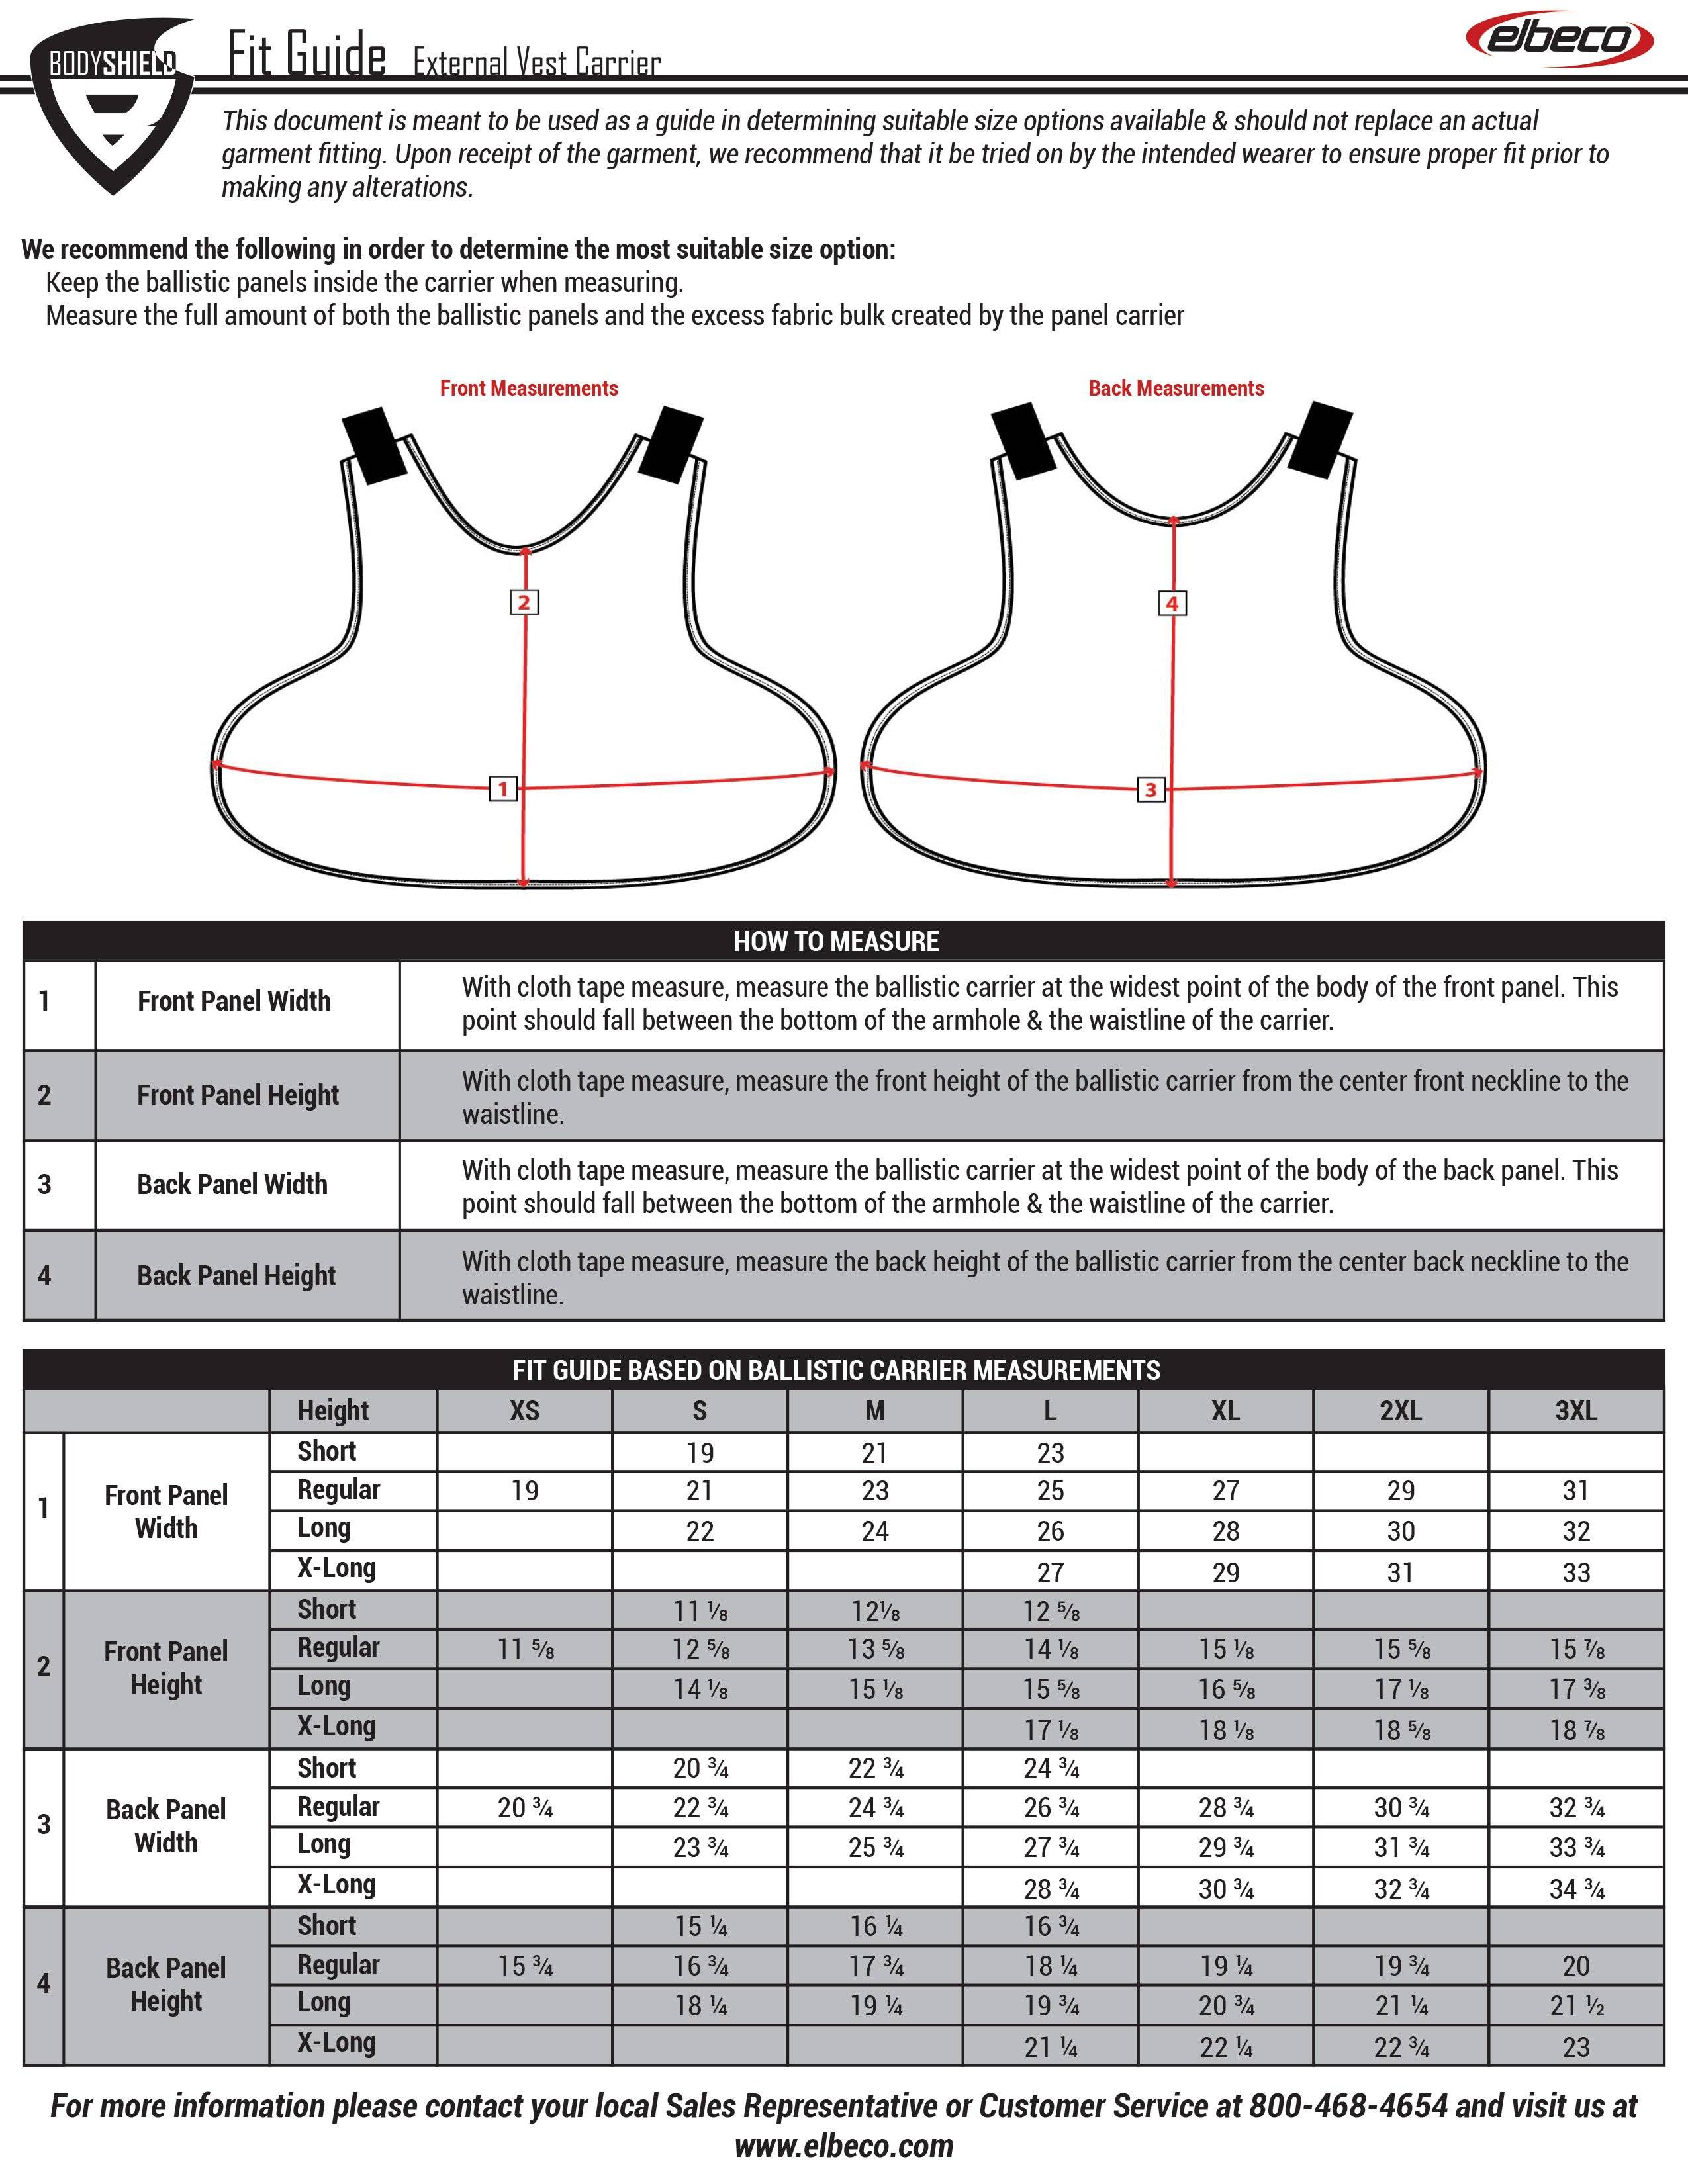 Under Armour Youth Medium Size Chart